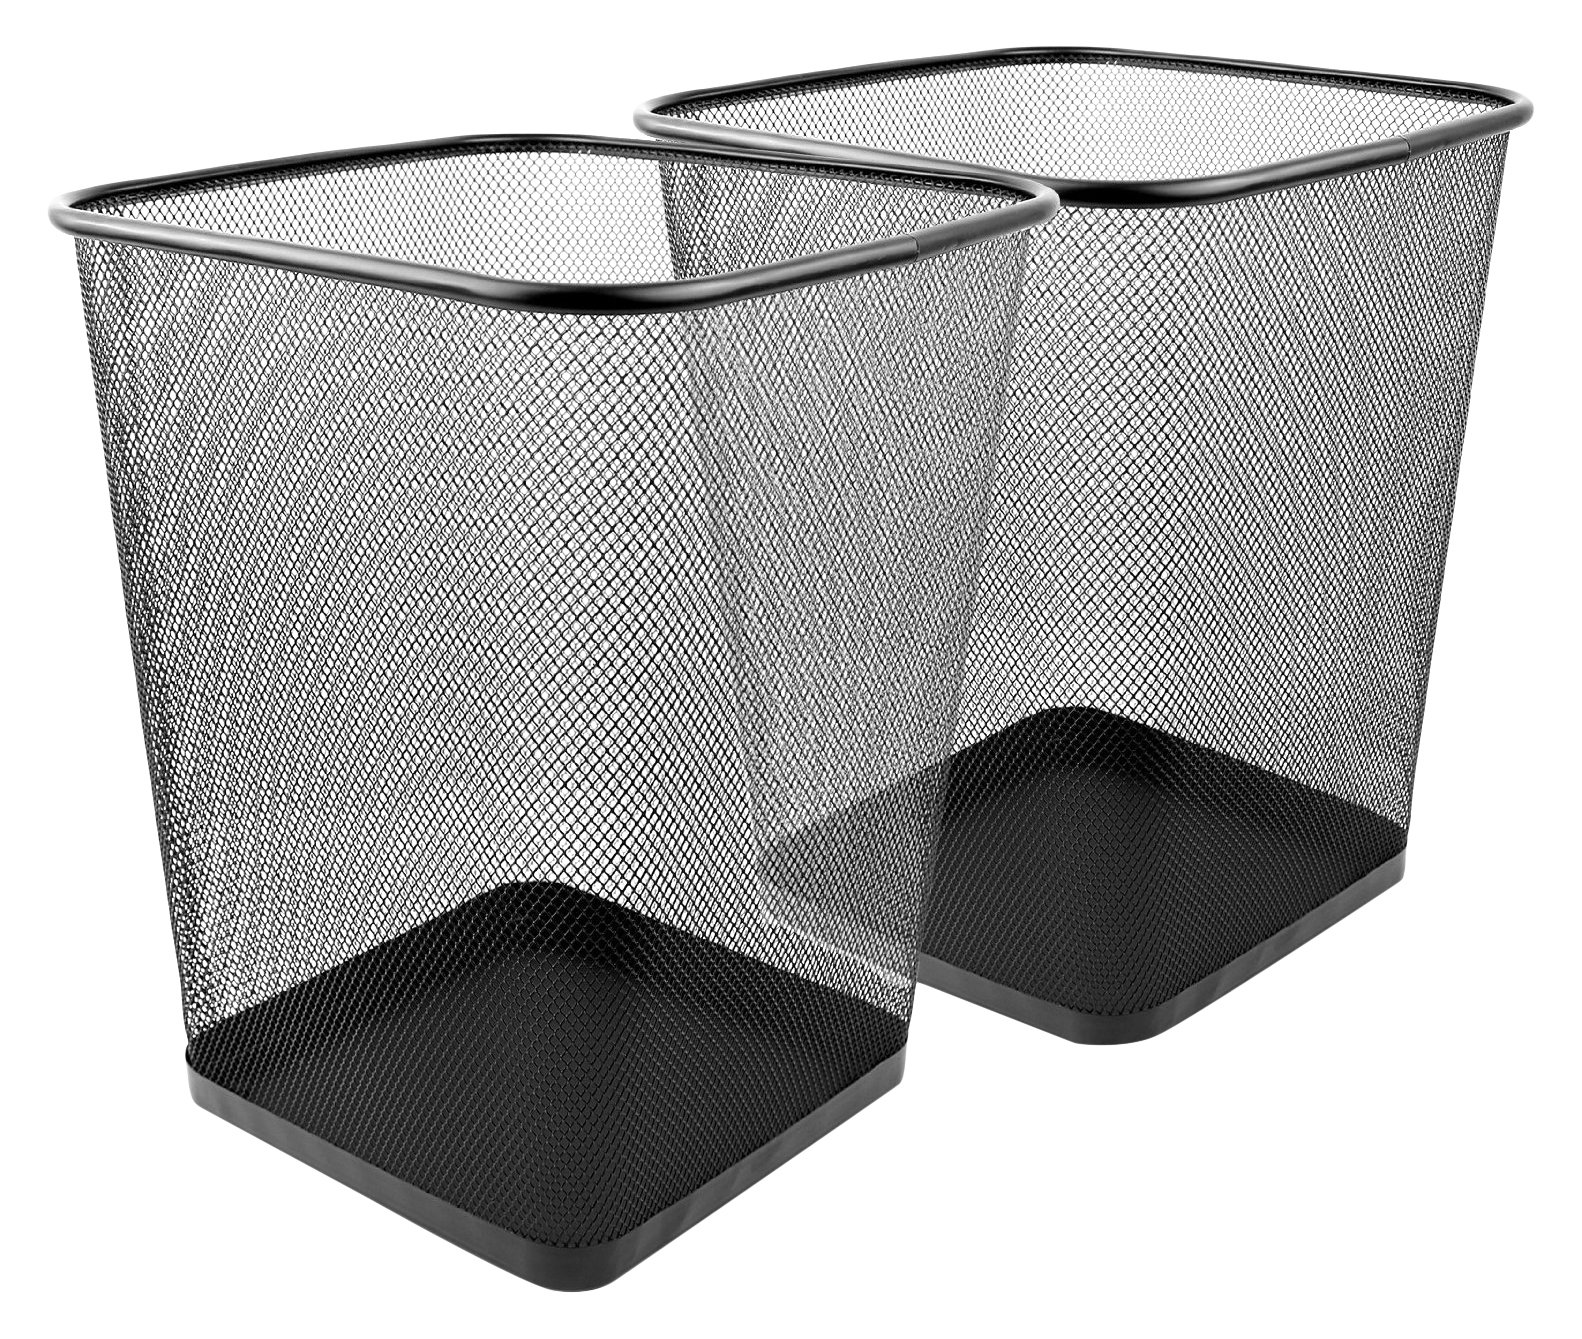 Book Cover Greenco Small Trash Cans for Home or Office, 2-Pack, 6 Gallon Black Mesh Square Trash Cans, Lightweight, Sturdy for Under Desk, Kitchen, Bedroom, Den, or Recycling Can